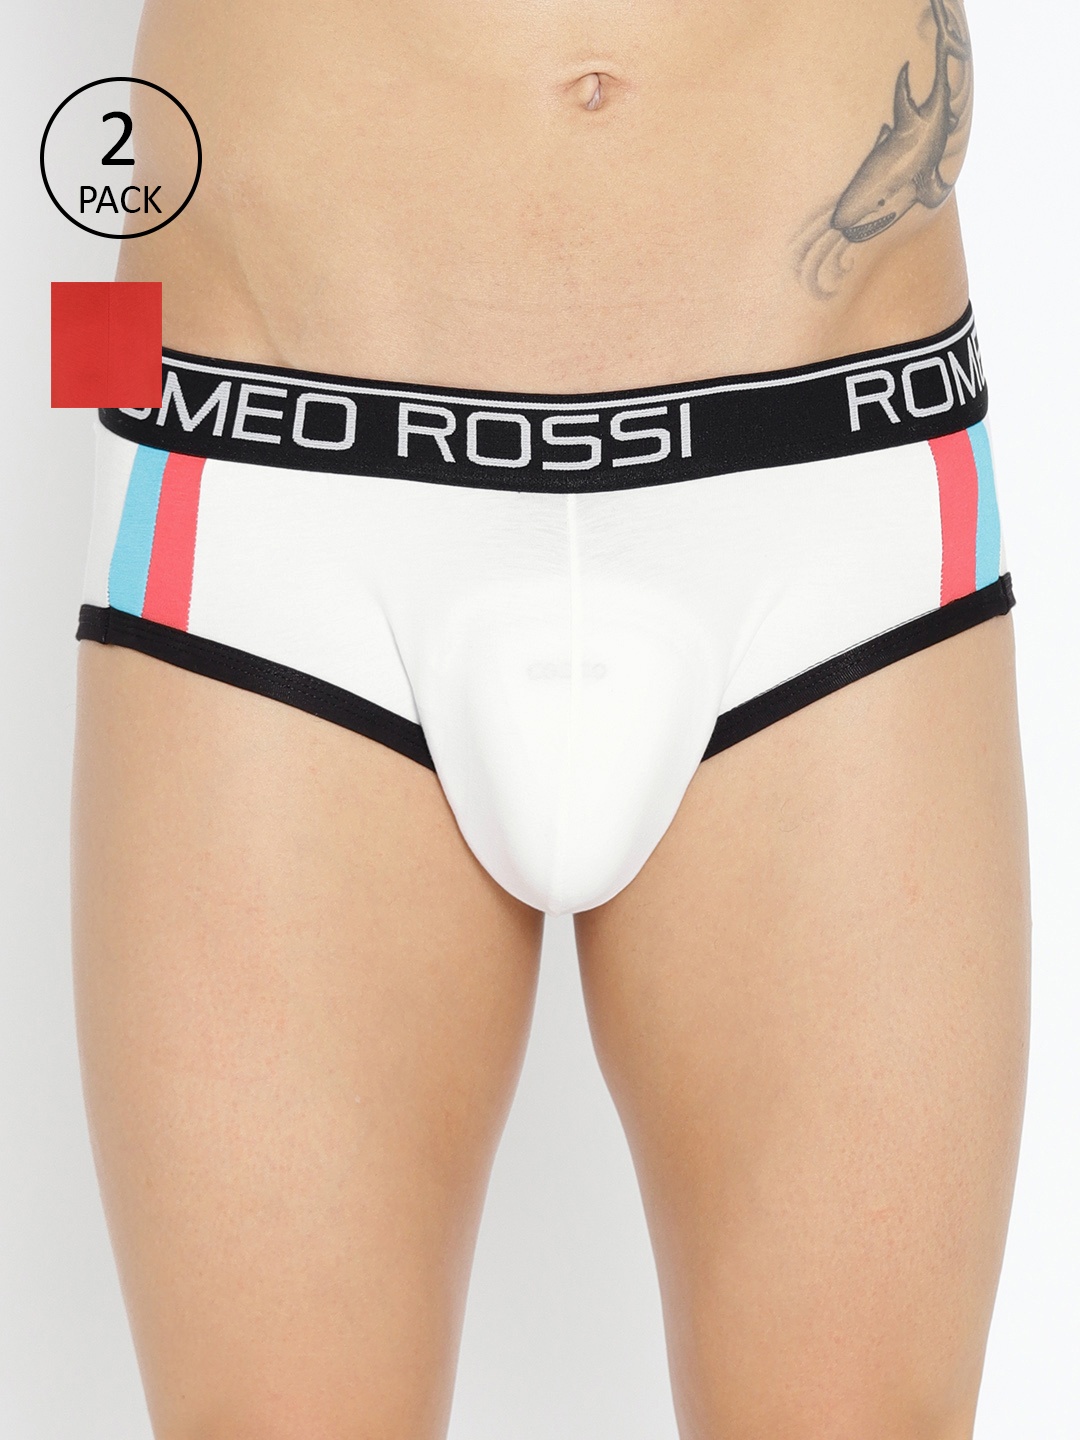 

ROMEO ROSSI Men White & Red Pack of 2 Striped Briefs CLBSP-2001-RD-WH